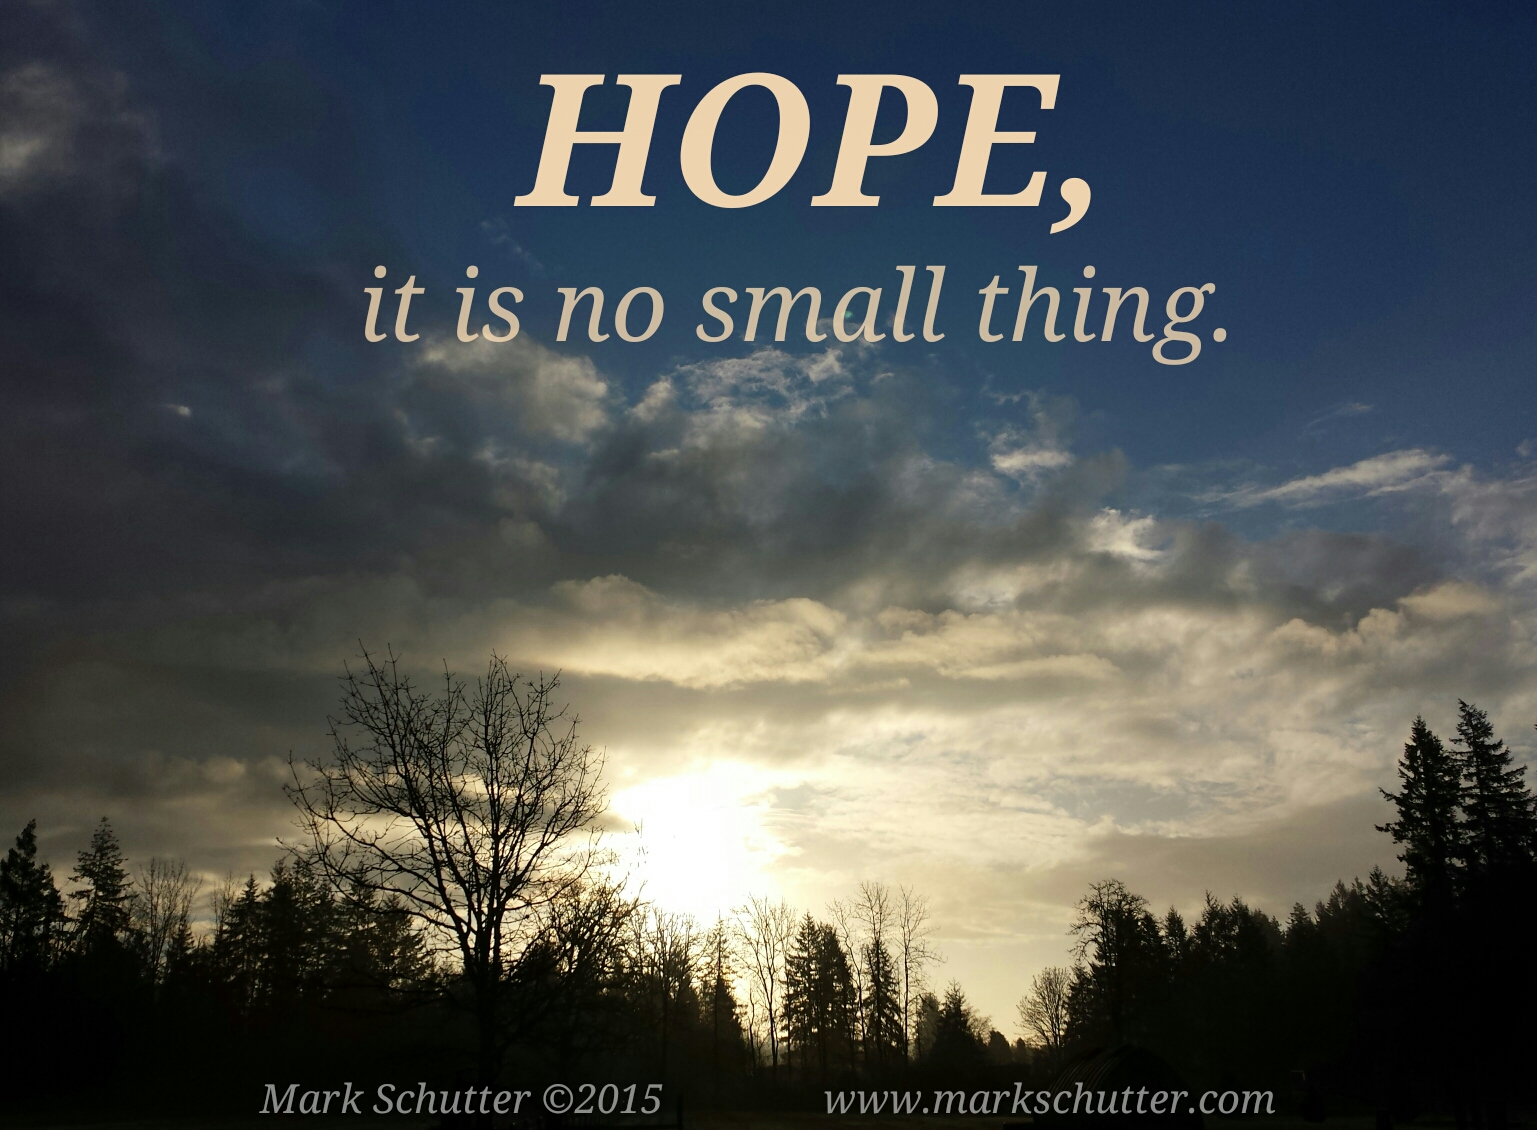 HOPE, it is no small thing!